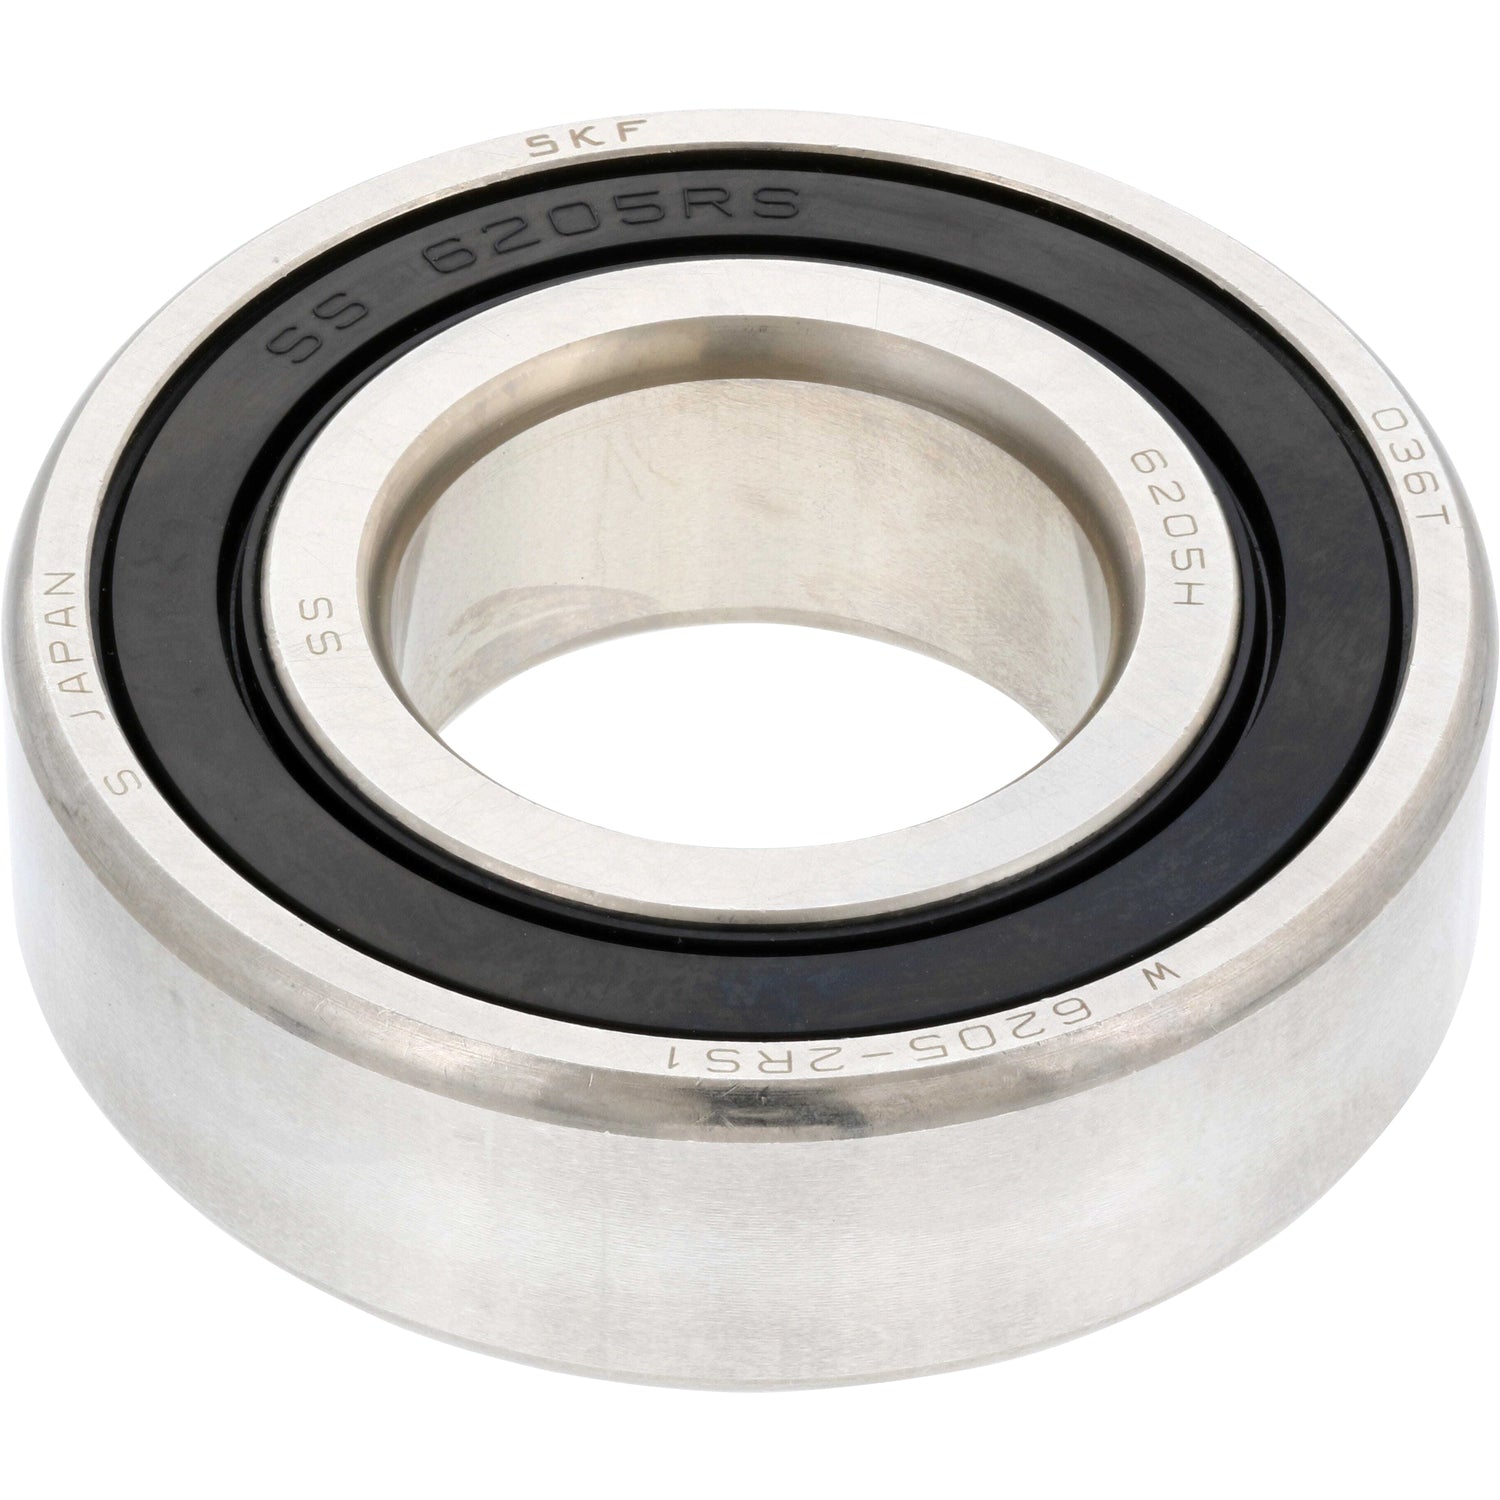 stainless-steel deep groove ball bearing with a black integral seal shown on white background: W 6205-2RS1